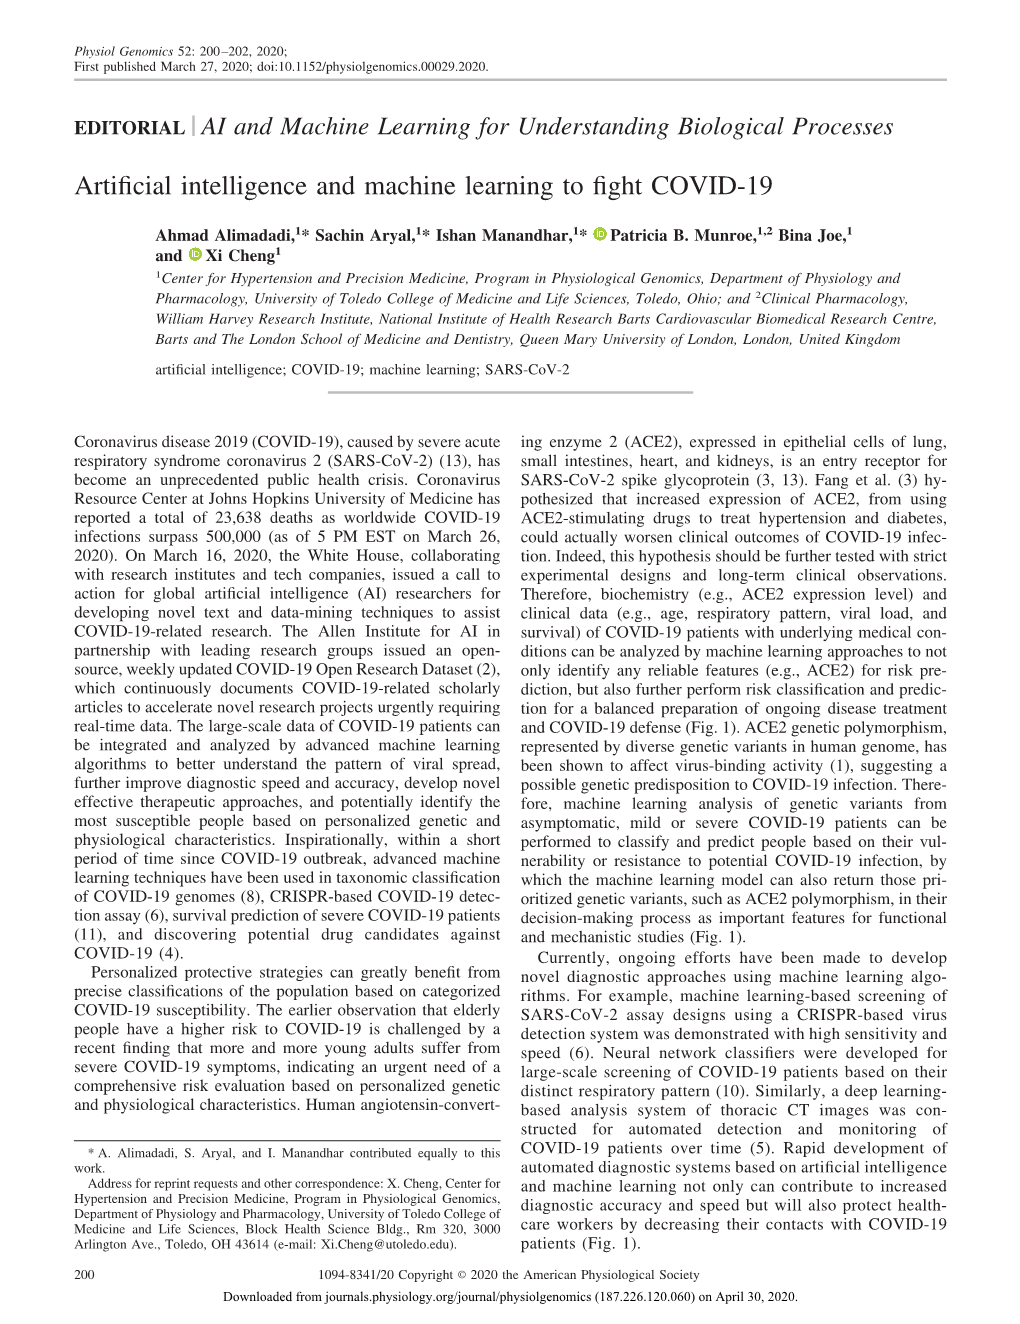 Artificial Intelligence and Machine Learning to Fight COVID-19